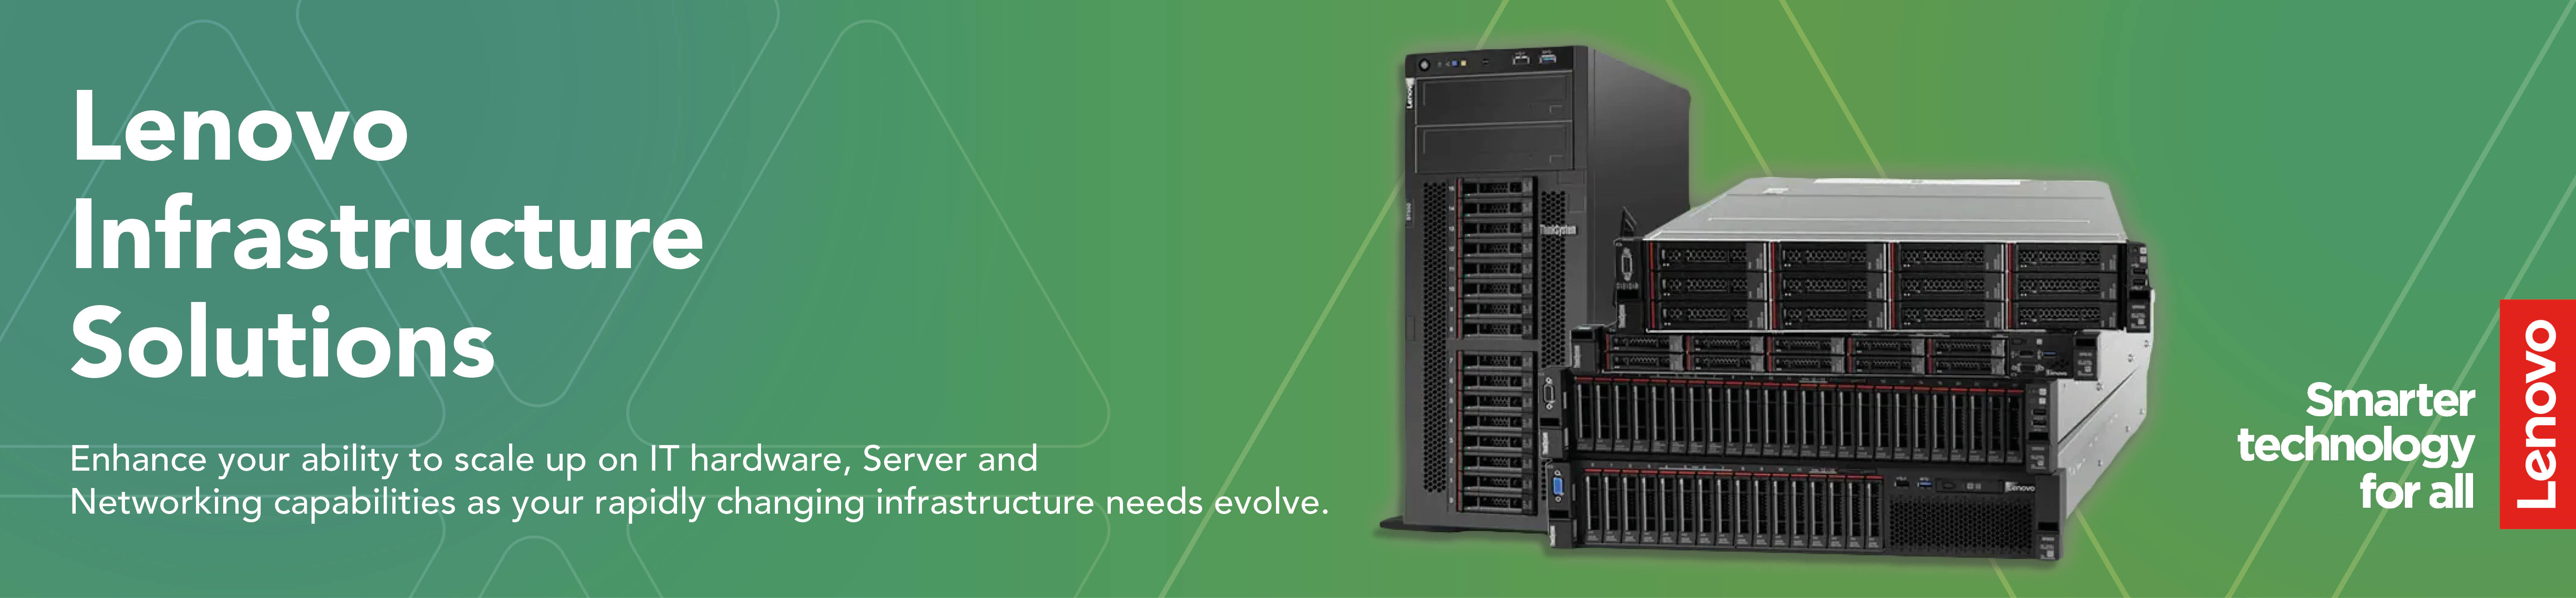 Lenovo Infrastructure Solutions - Enhance your ability to scale up on IT hardware, Erver and Networking capabilities as your rapidly changing infrastructure needs evolve. 